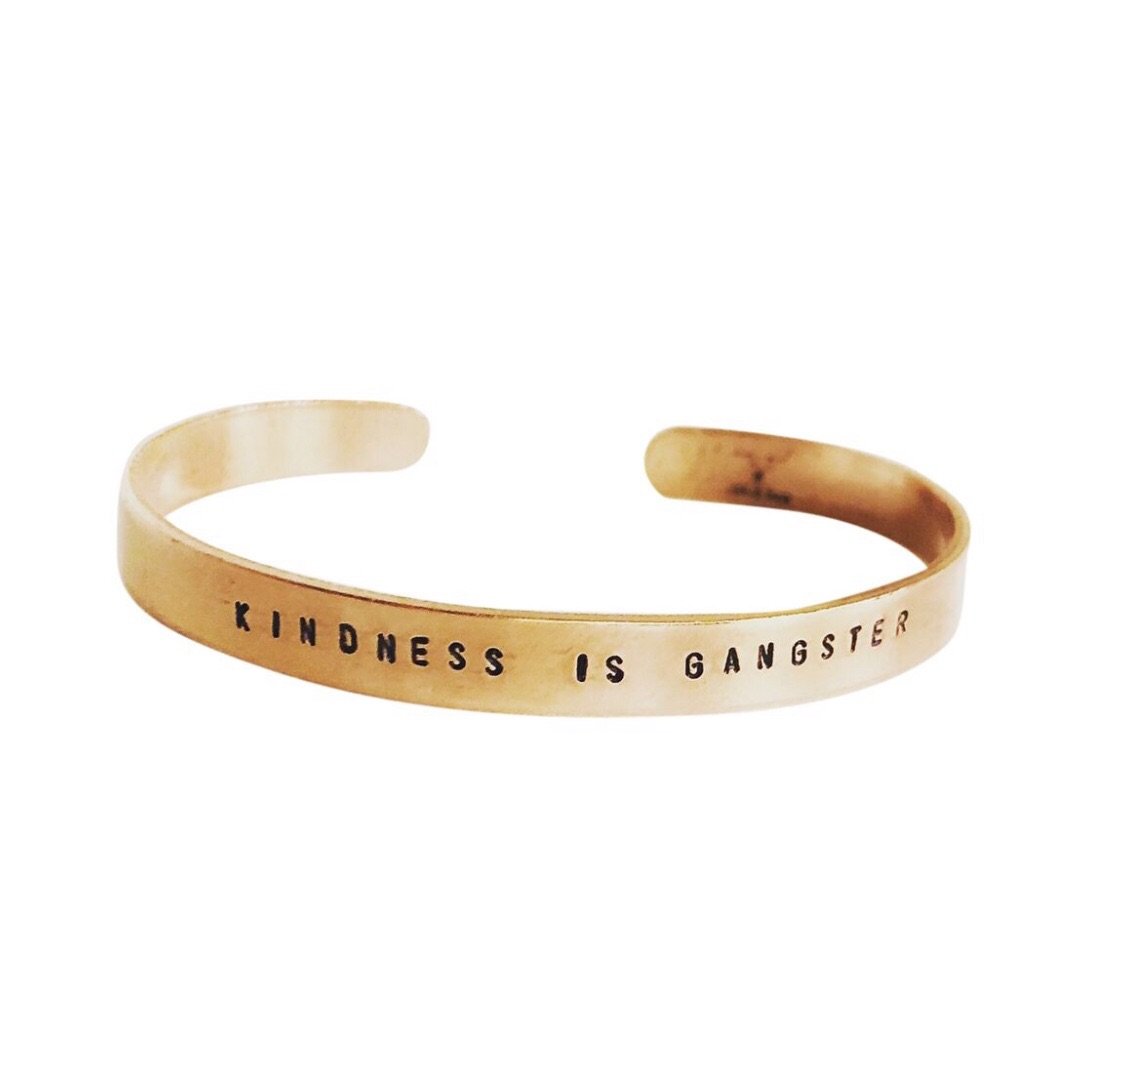 Kindness is Gangster Cuff